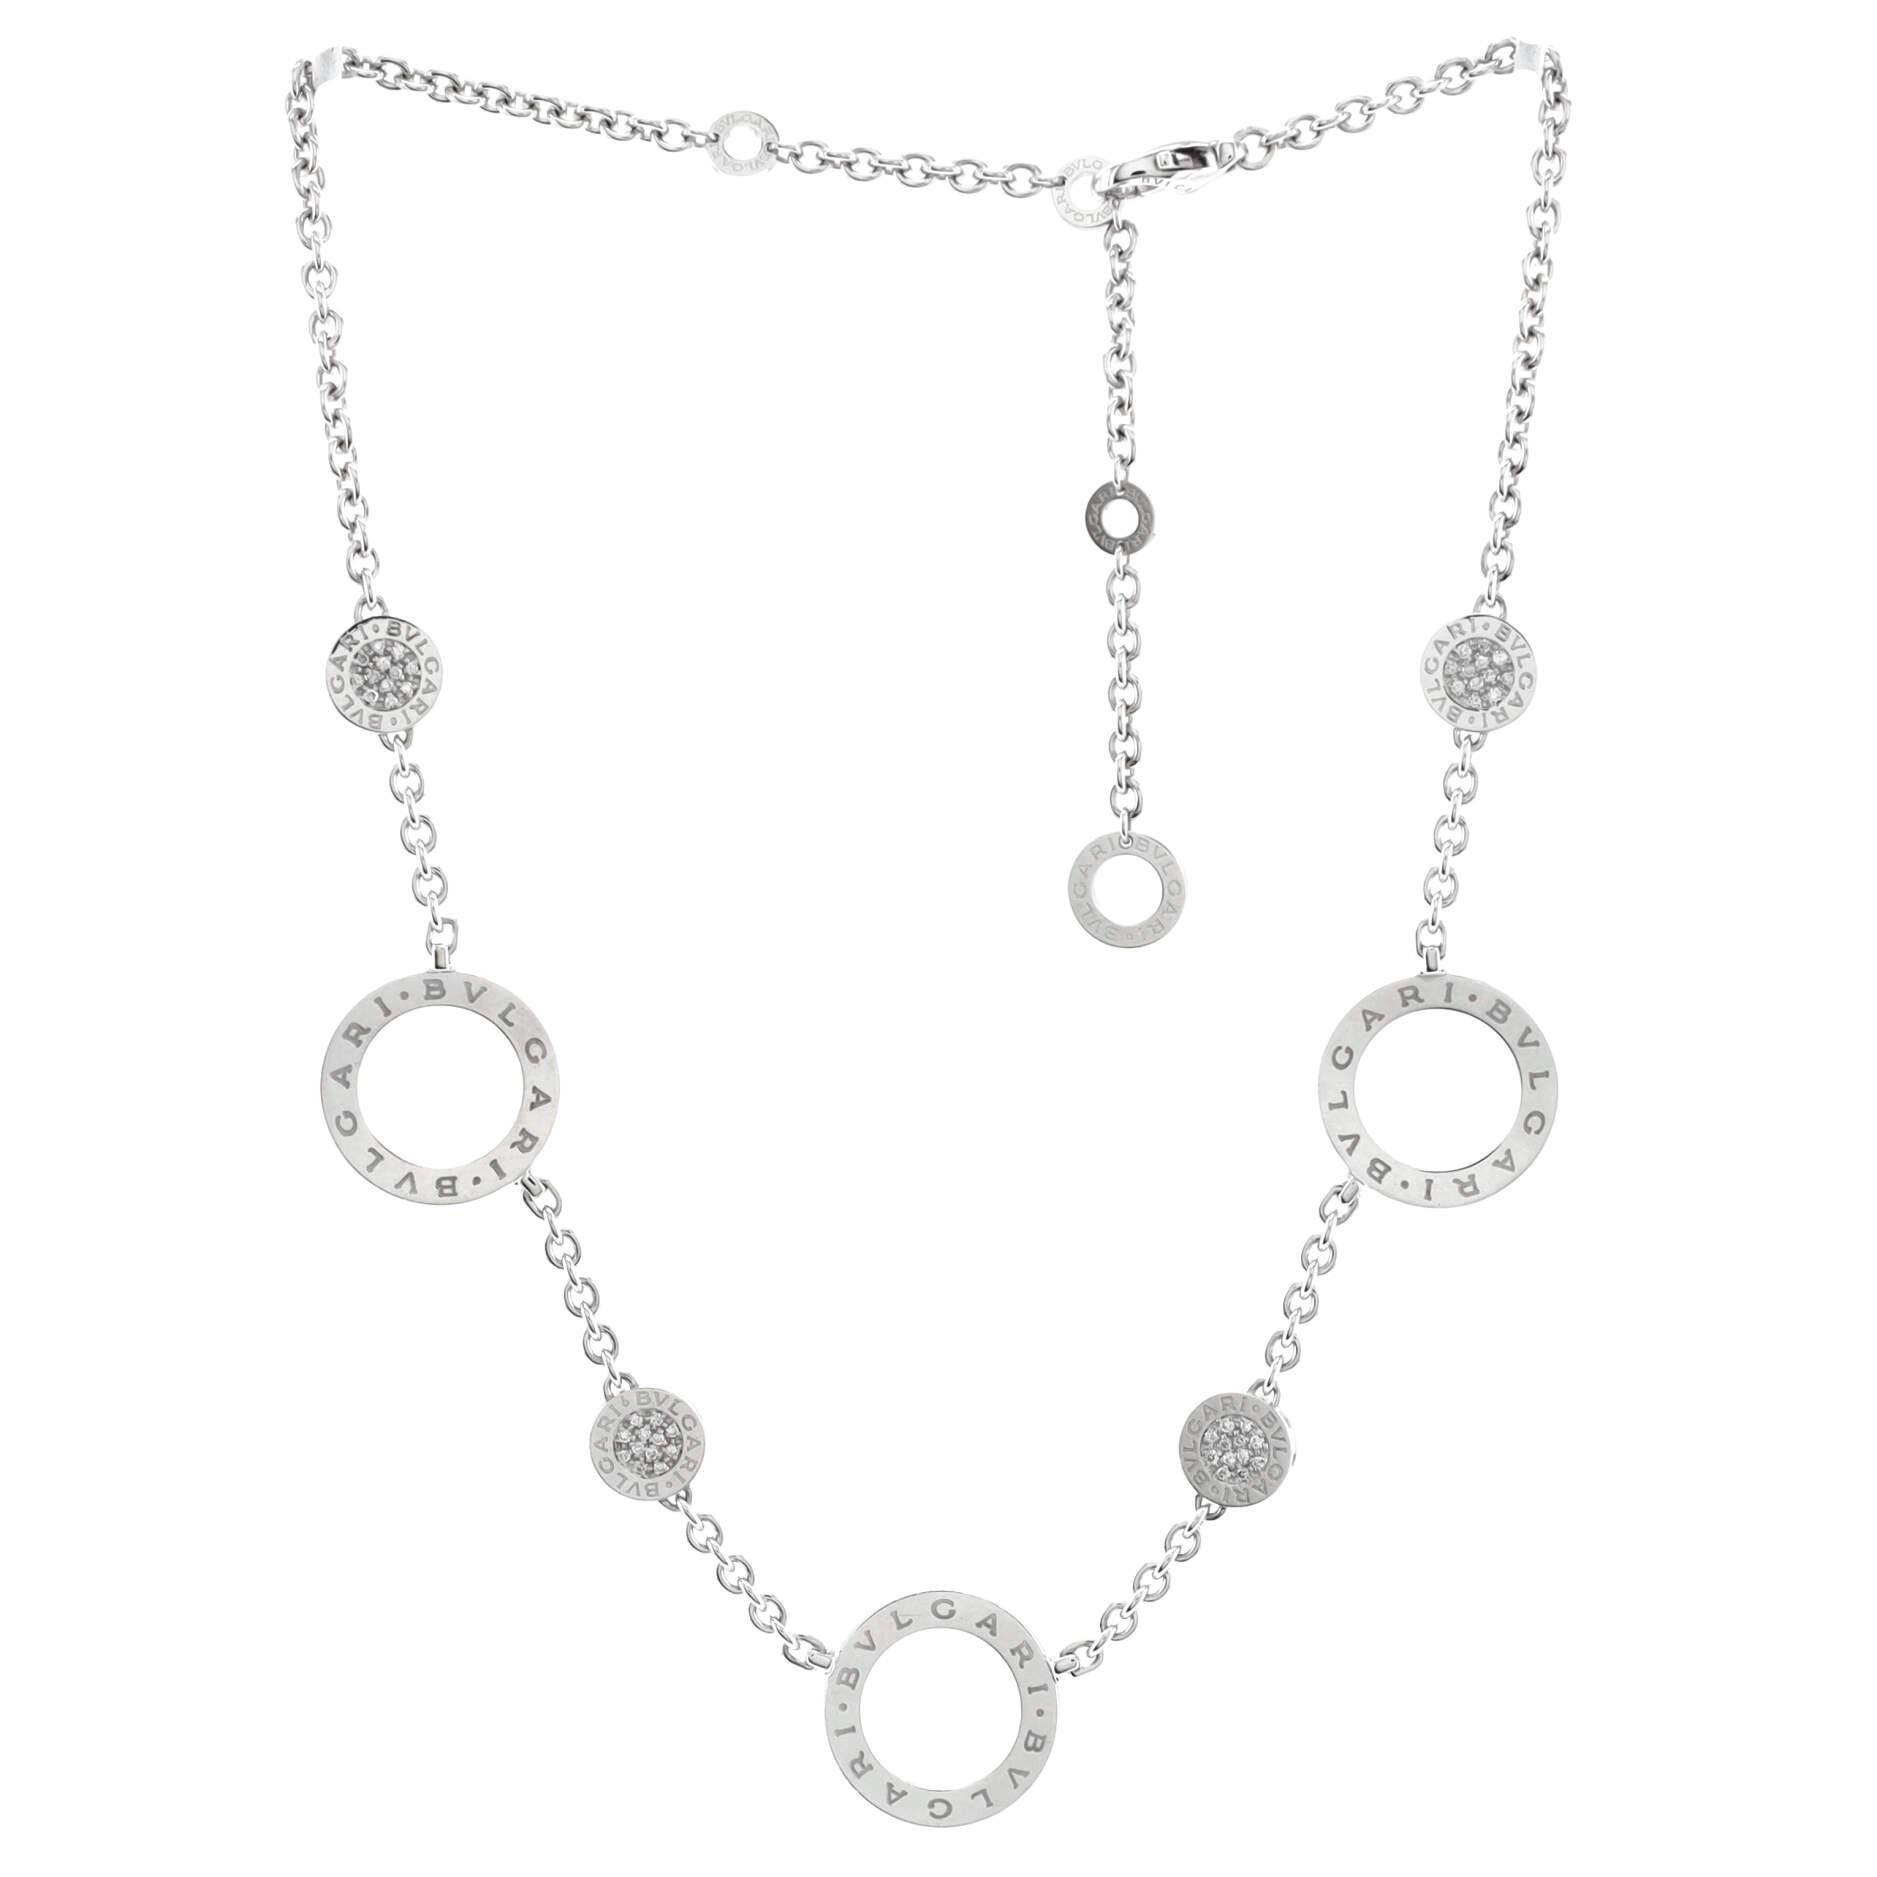 Bvlgari Bvlgari Bvlgari Sautoir Station Necklace 18K White Gold with Diamonds In Good Condition For Sale In New York, NY